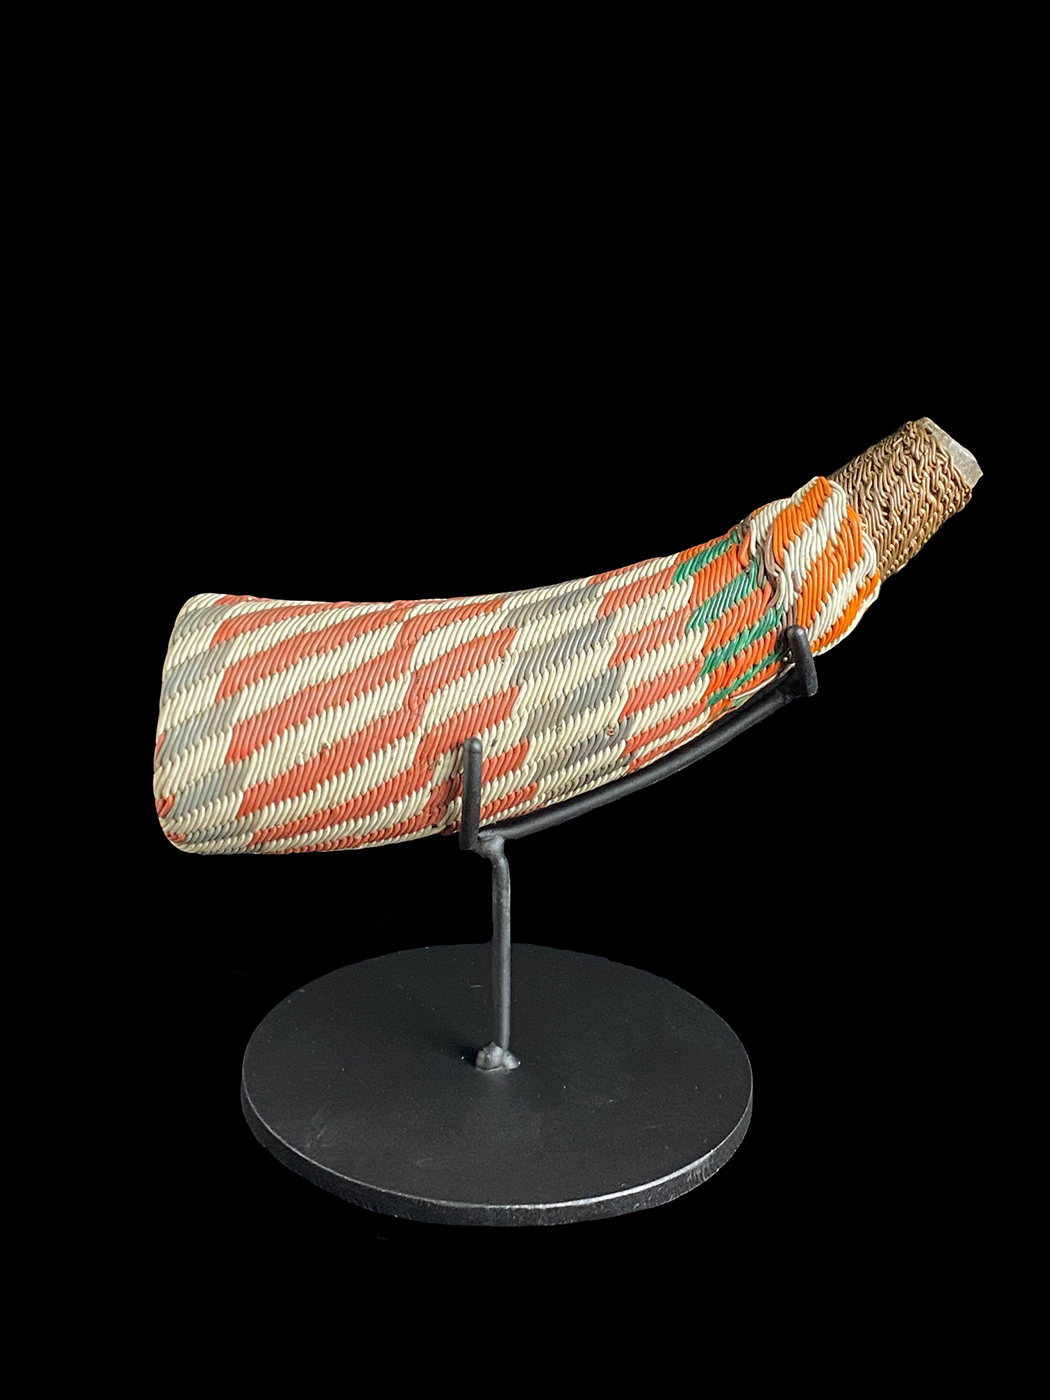 Wooden Snuff Container Wrapped in Telephone Cable Wire - Zulu People, South Africa